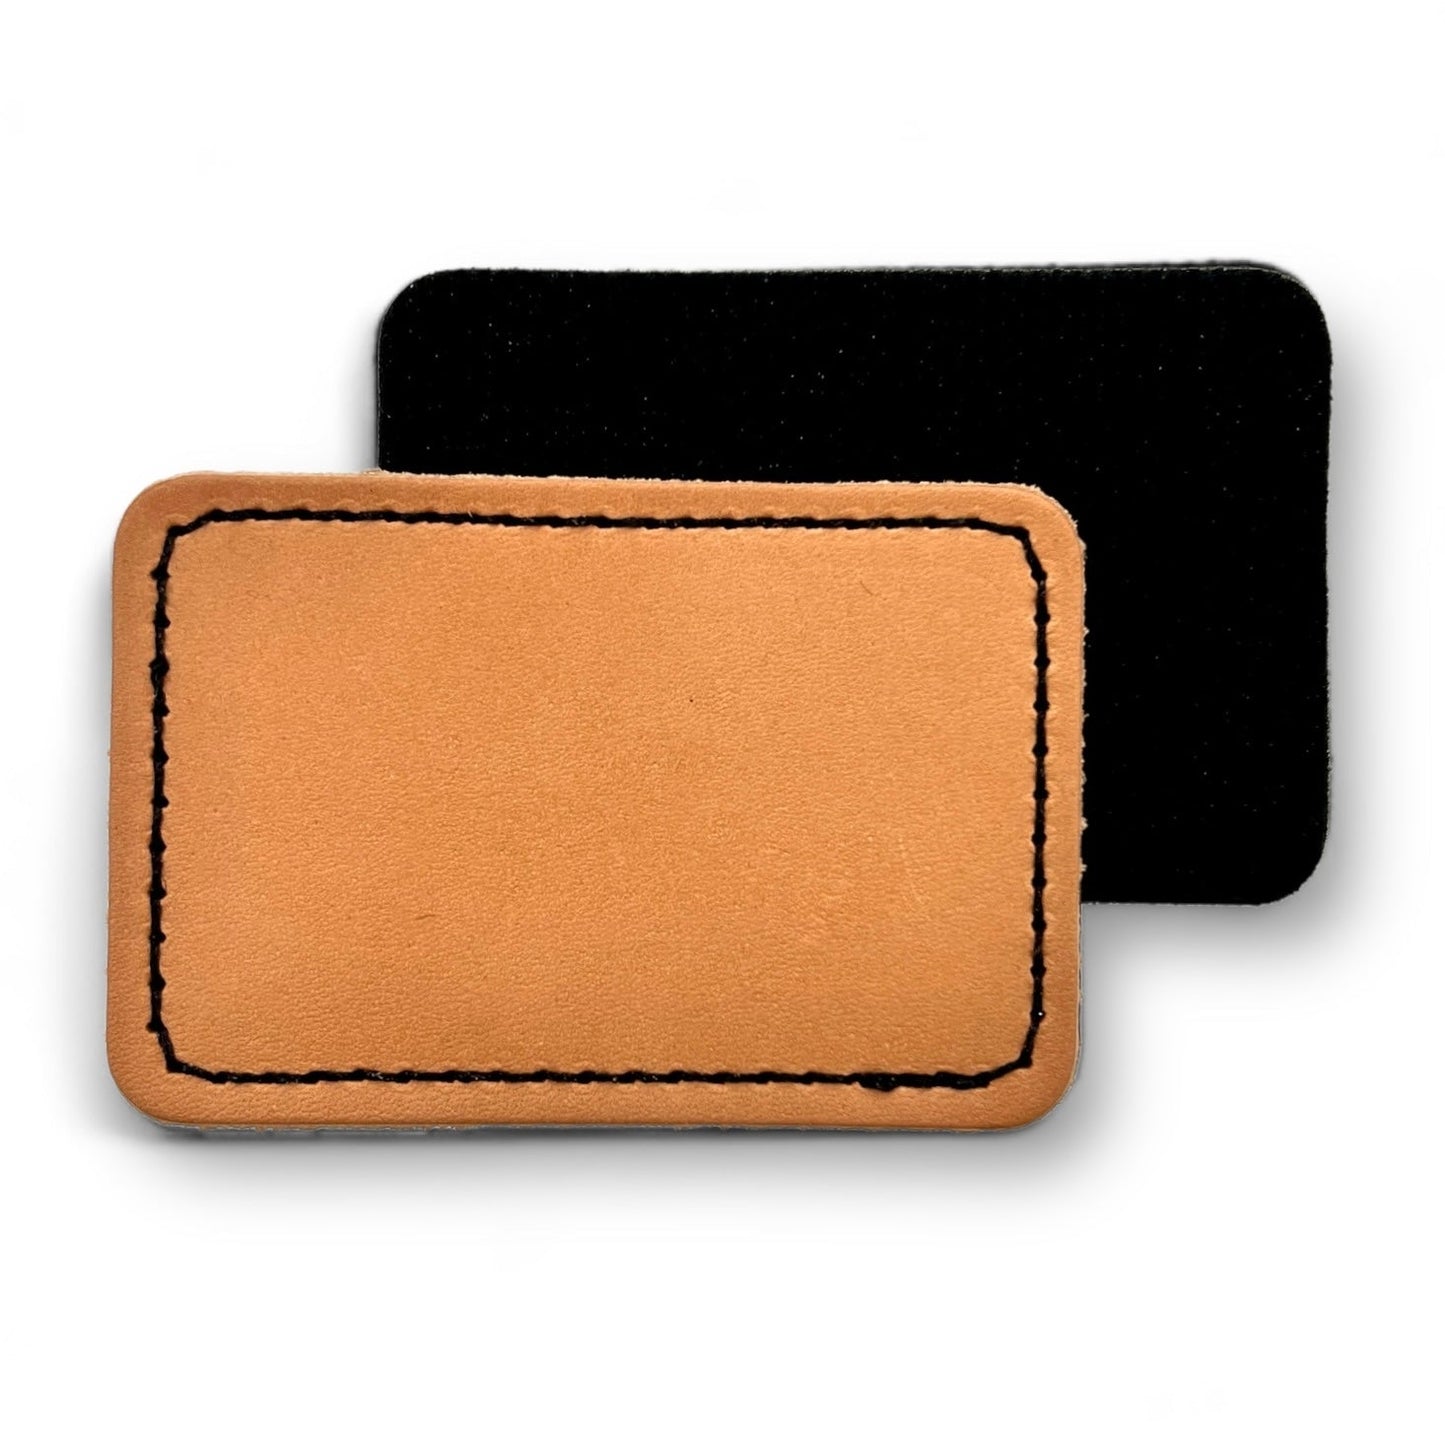 Jersey Tan Stitched Leather Hook & Loop Patches - #LoneStar Adhesive#